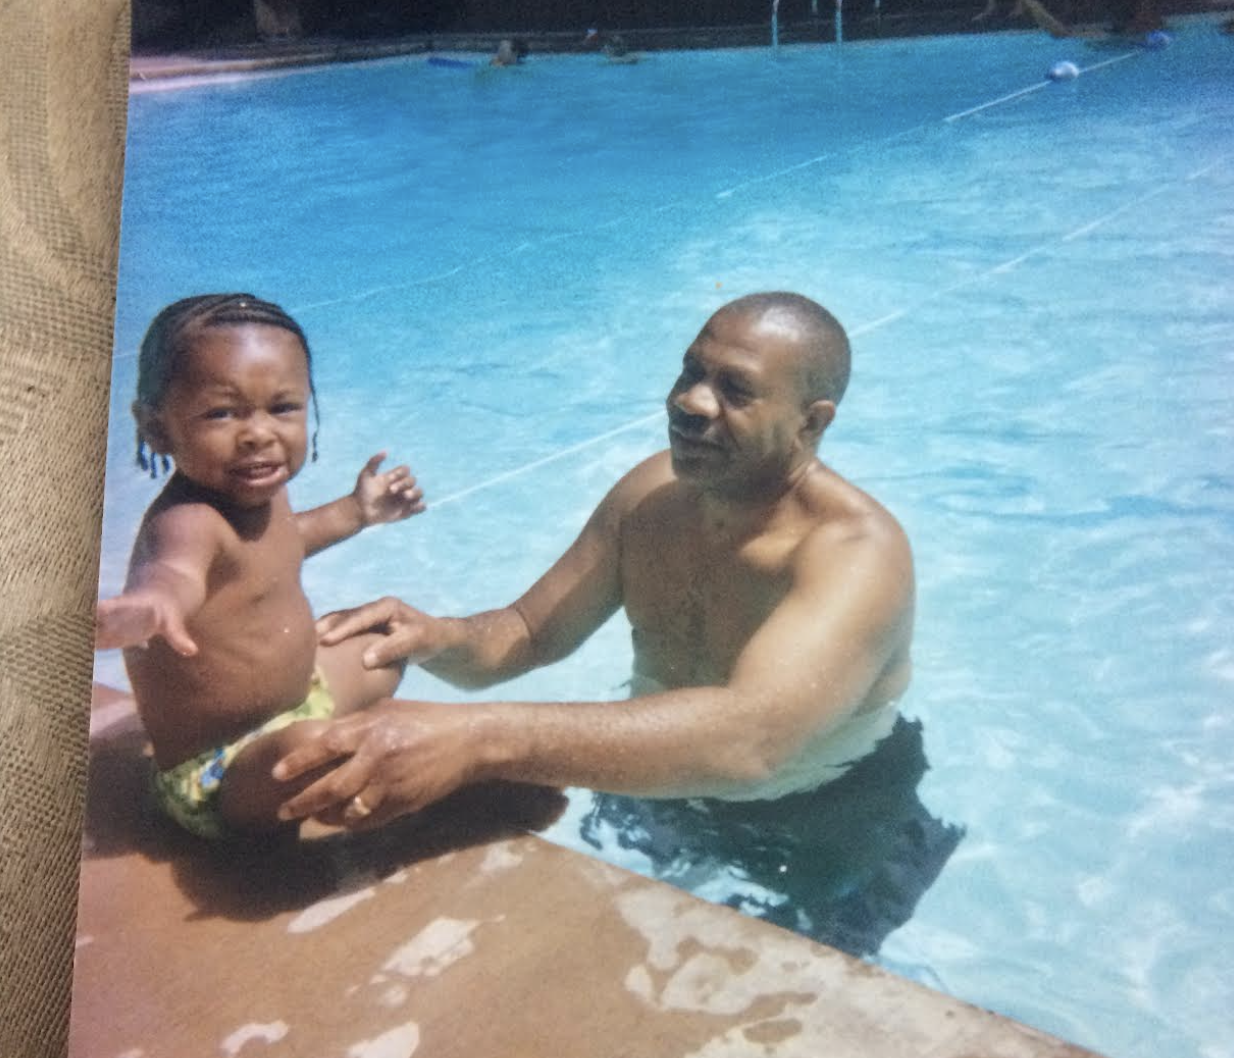 Dwayne Davis as a baby, sitting poolside as his grandfather Lenny Williams stands in the pool with his arms holding onto the young child.